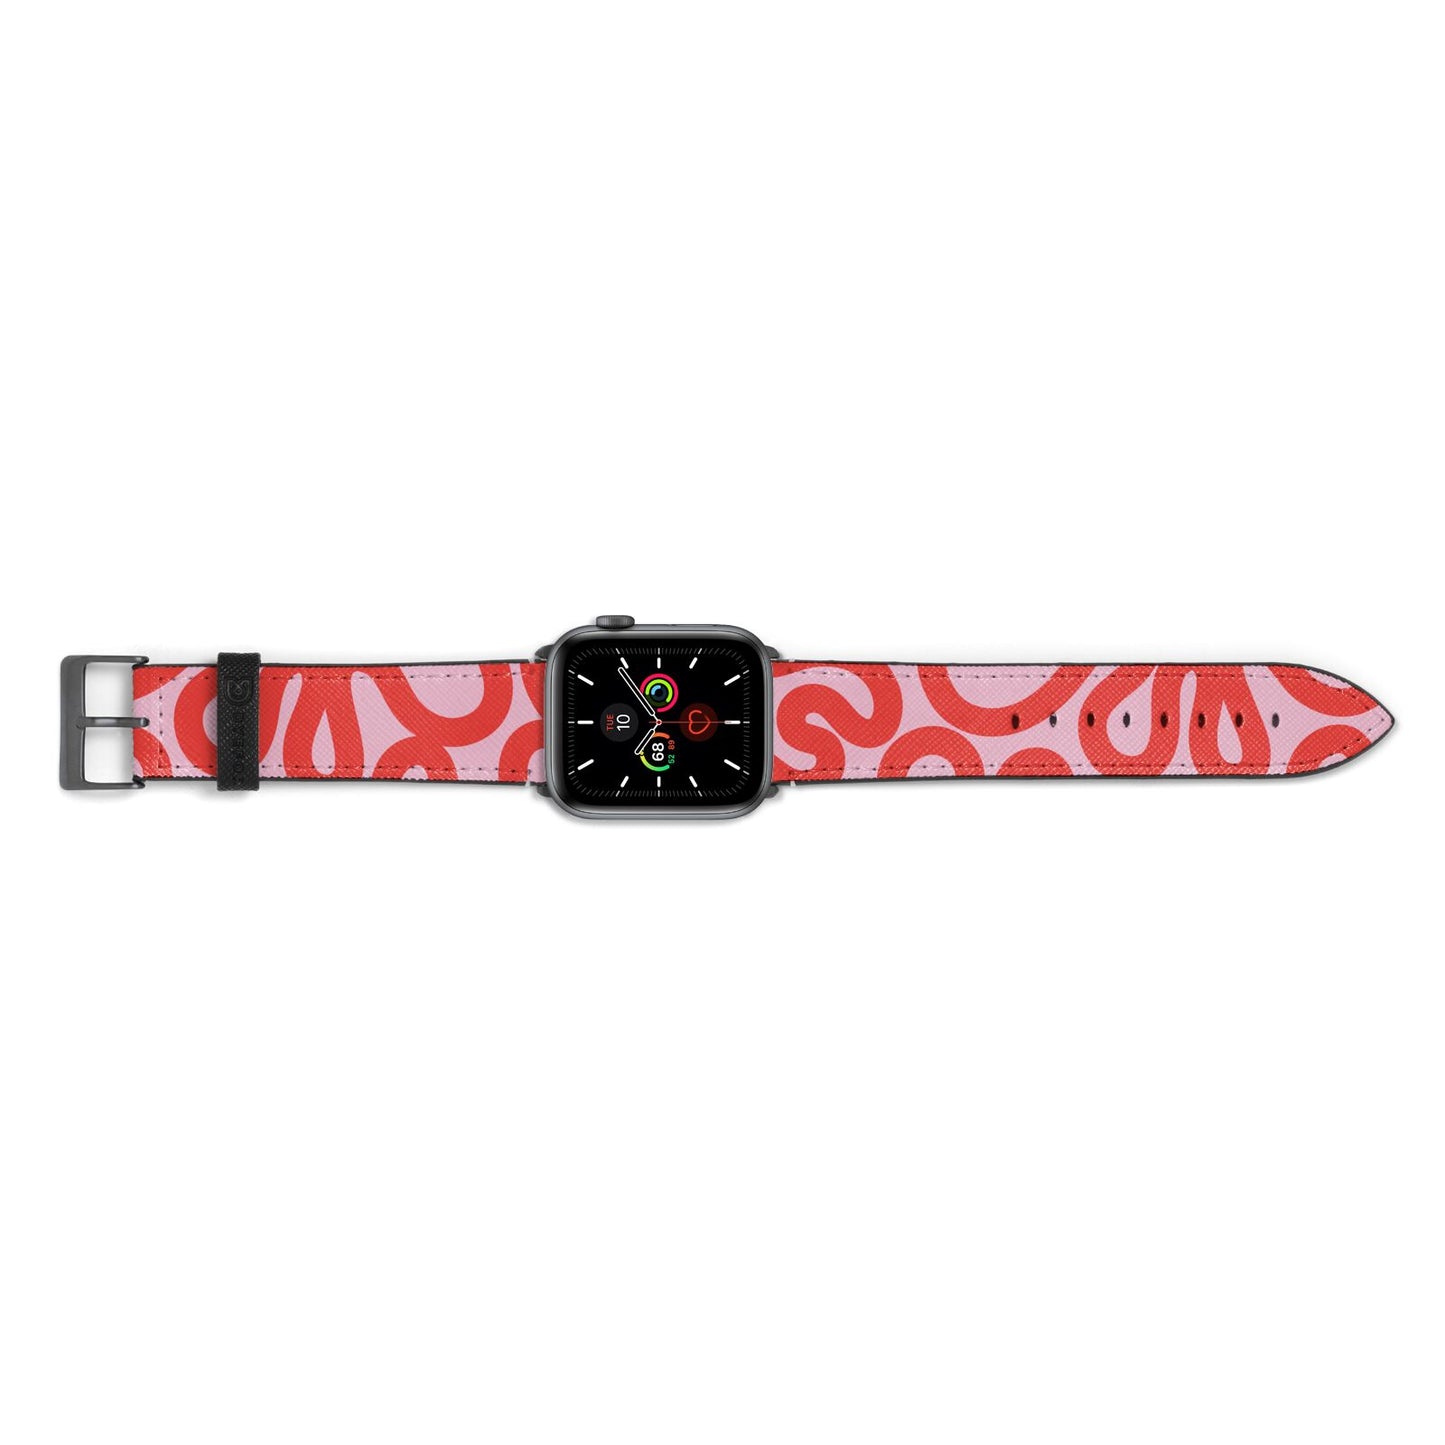 Squiggle Apple Watch Strap Landscape Image Space Grey Hardware